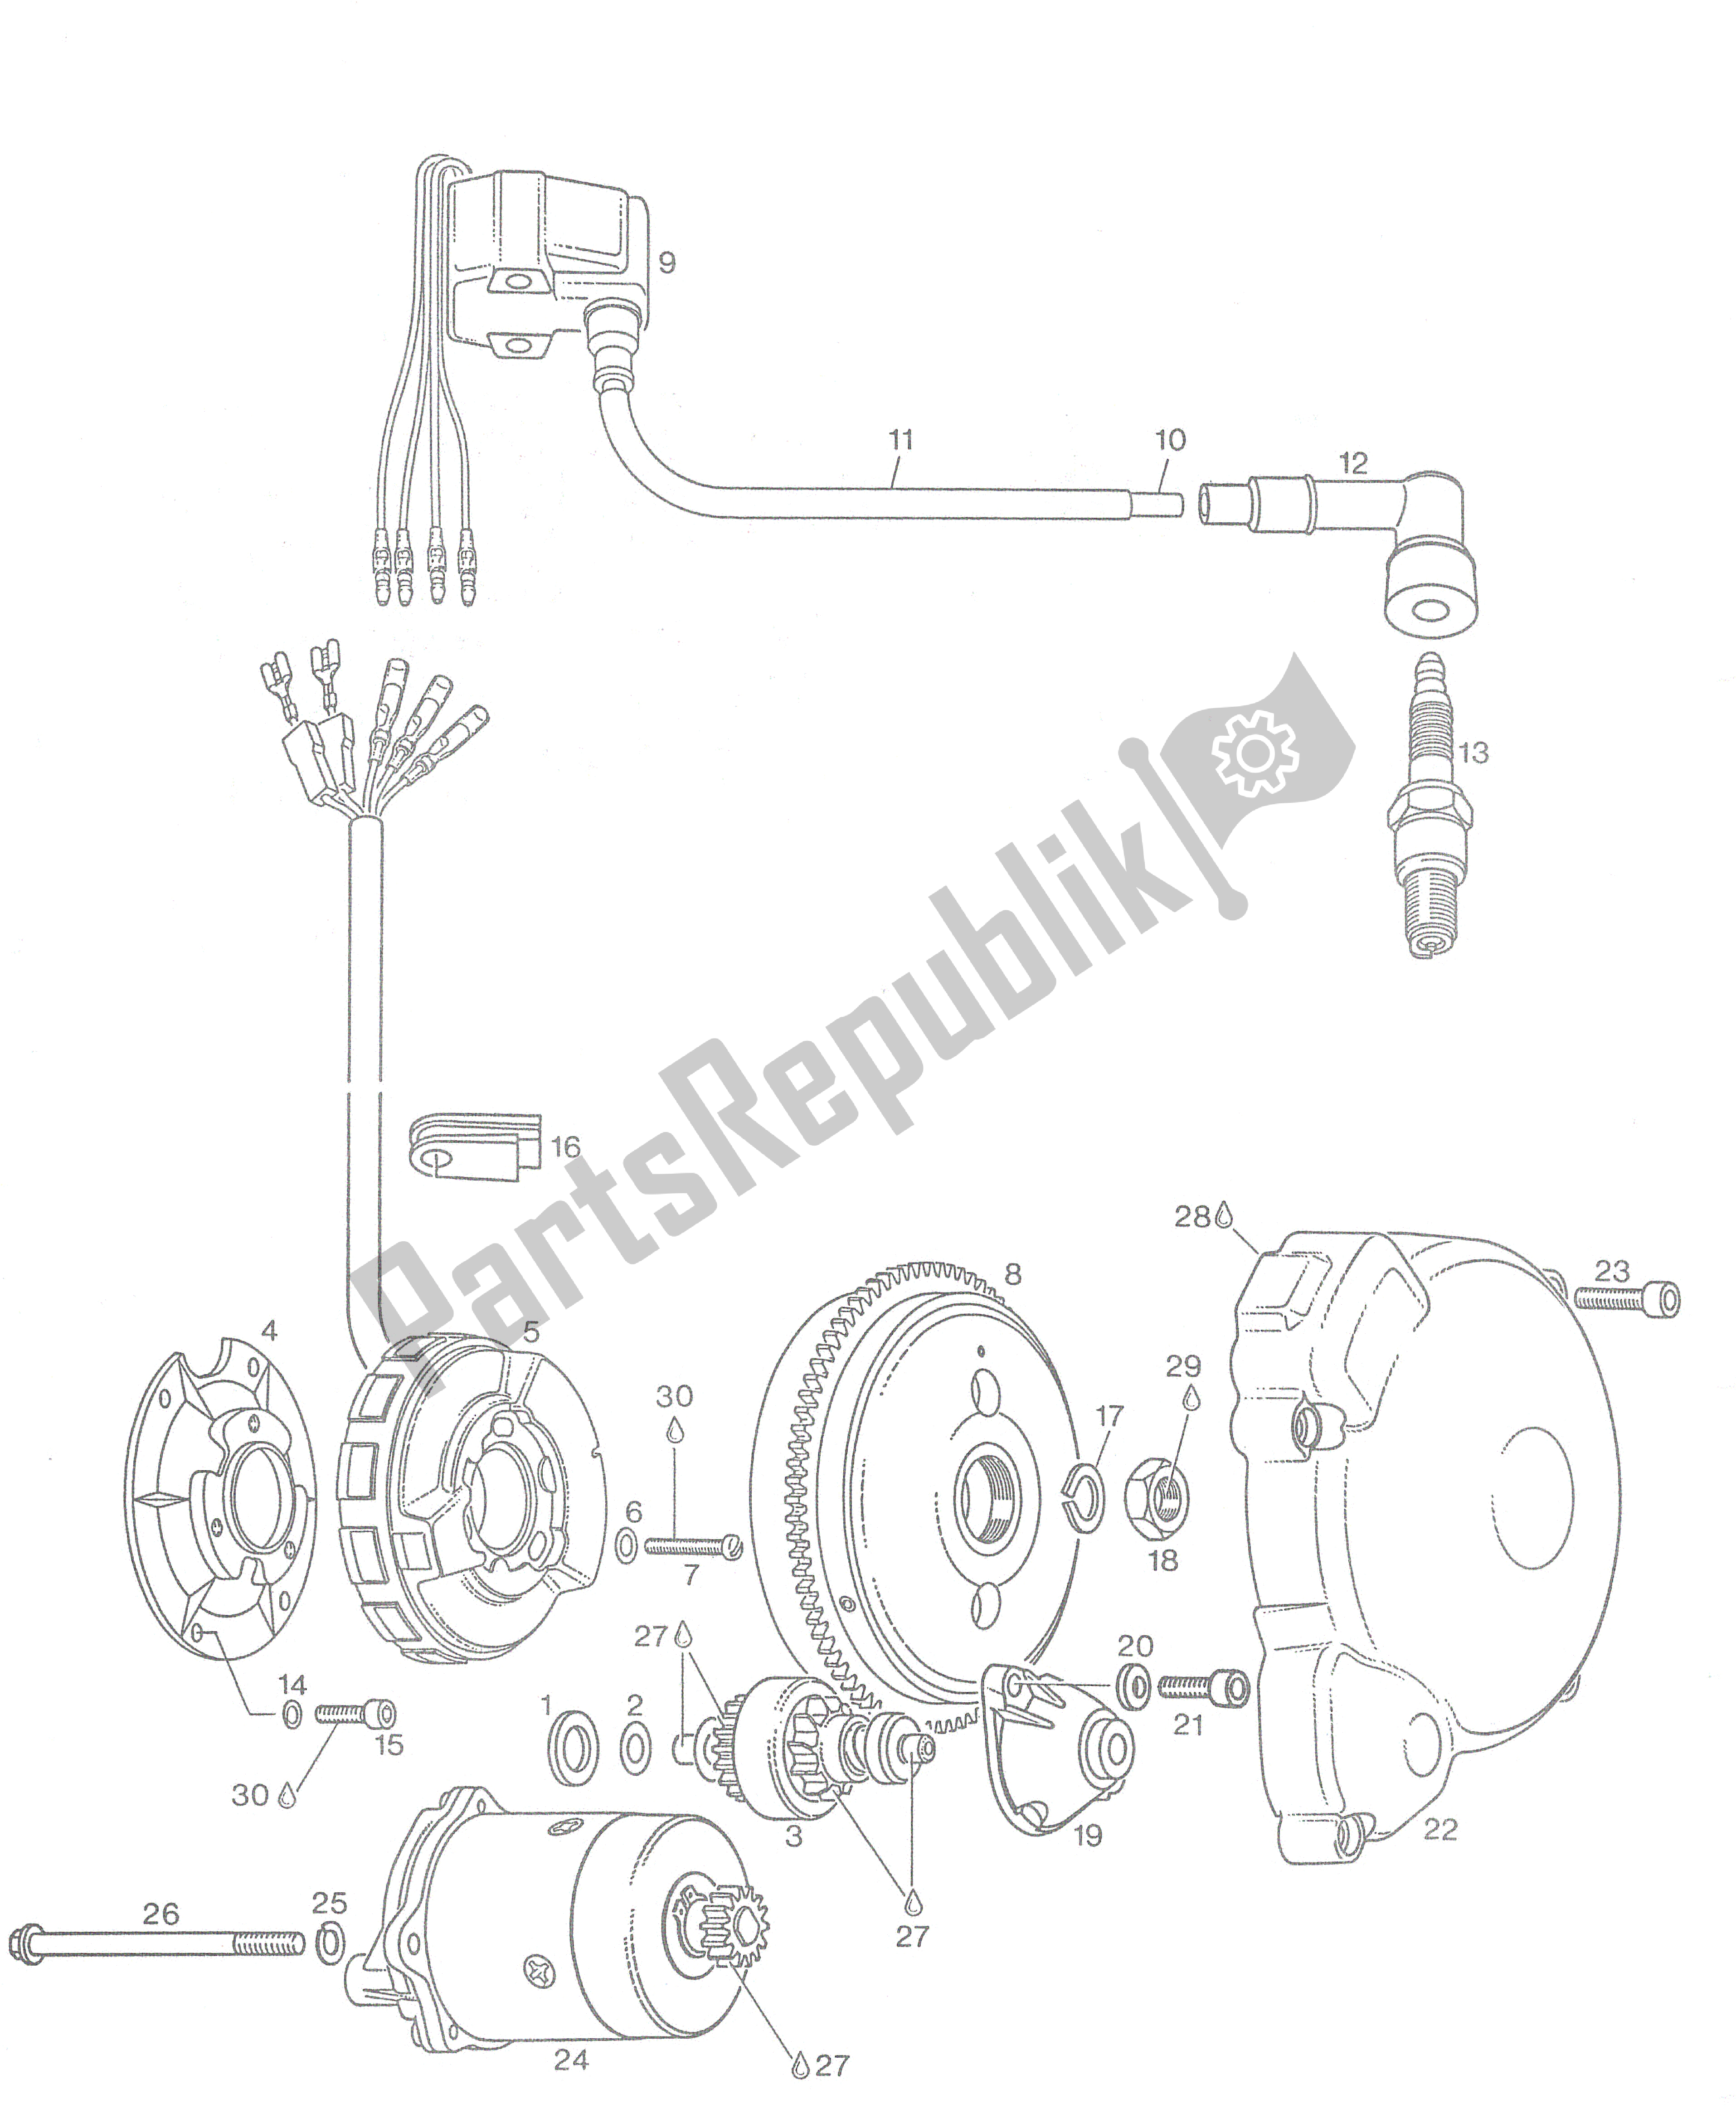 All parts for the Sem Magneto Generator, Electric Starter, Ignitioncover of the Aprilia Rotax 123 125 1991 - 1992